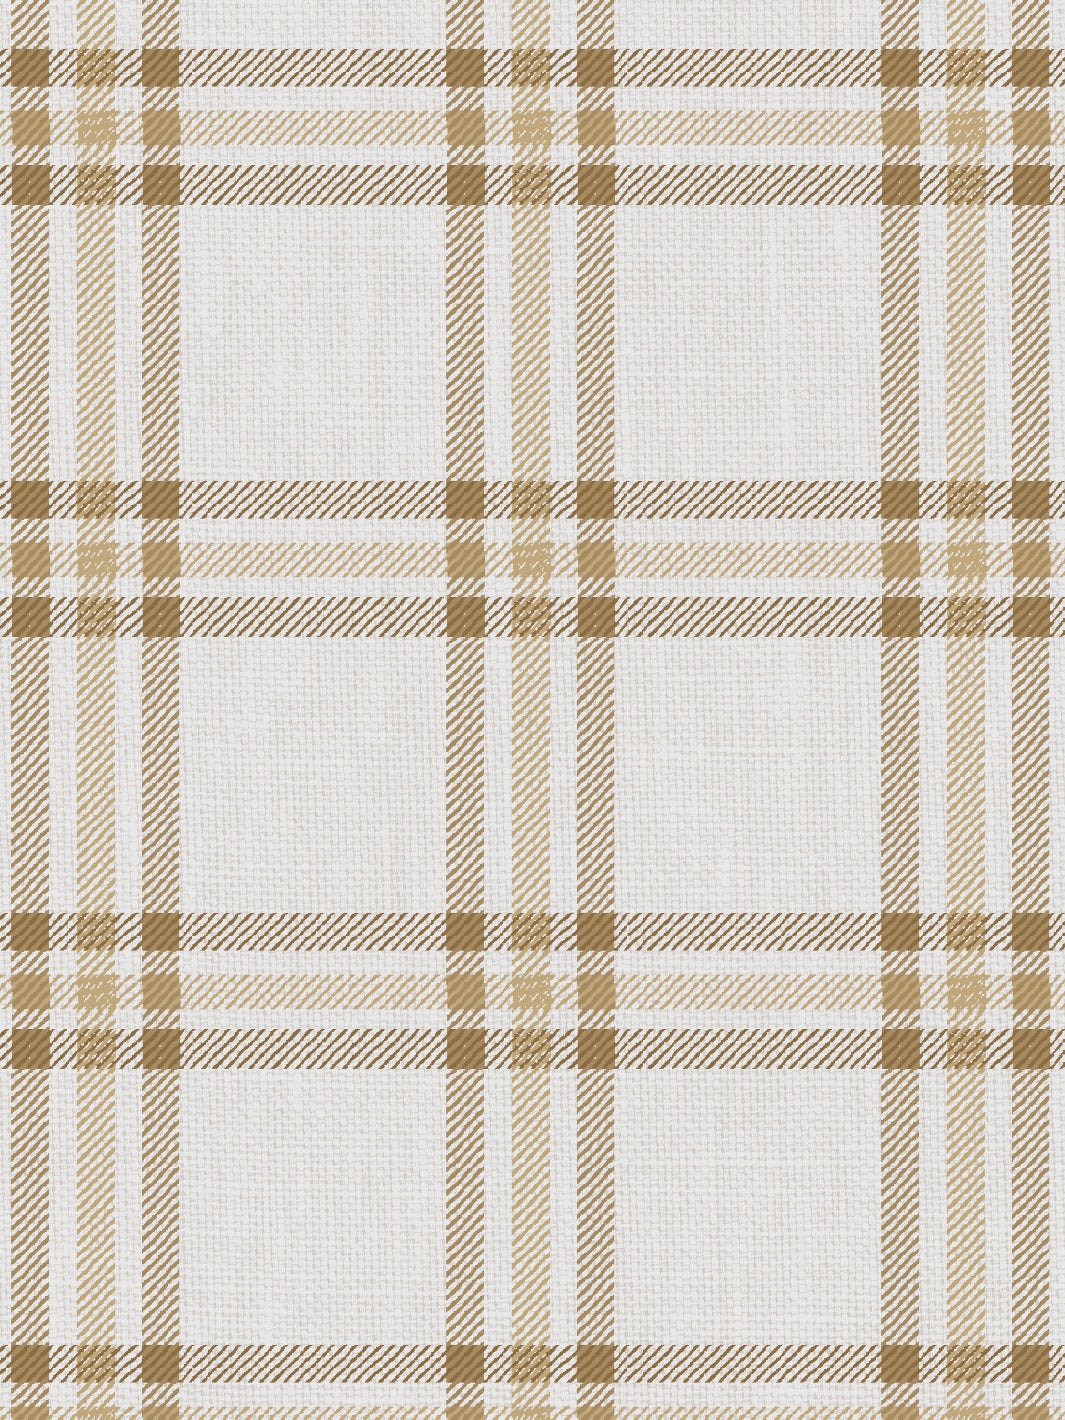 'Rogers Plaid' Wallpaper by Nathan Turner - Gold